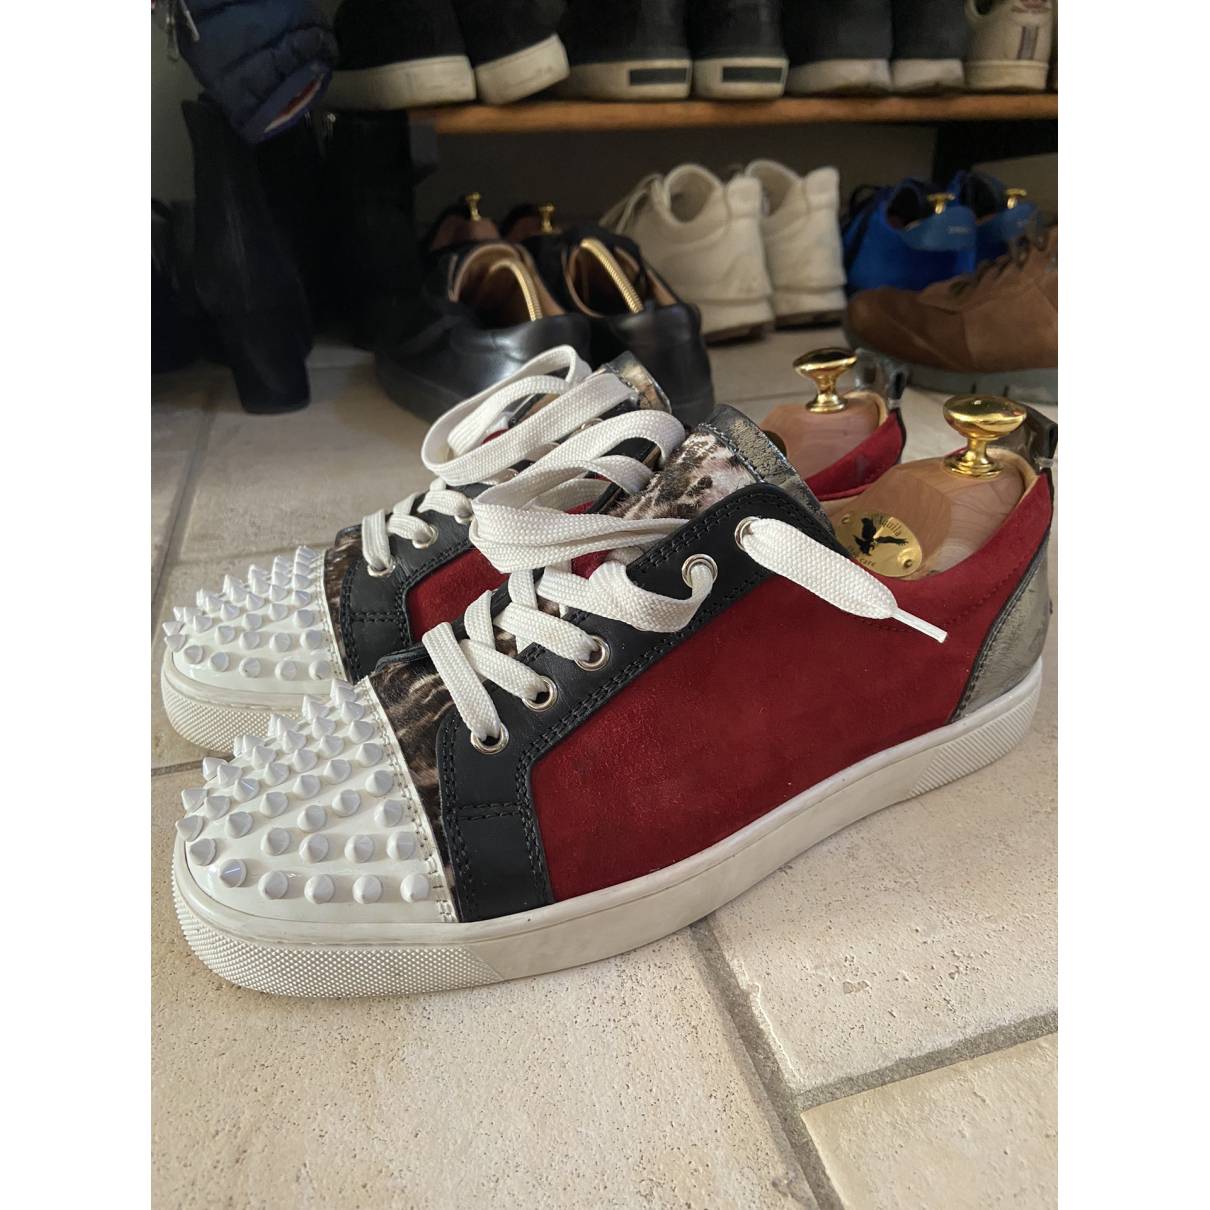 Louis junior spike low trainers Christian Louboutin Red size 41 EU in Suede  - 32678673